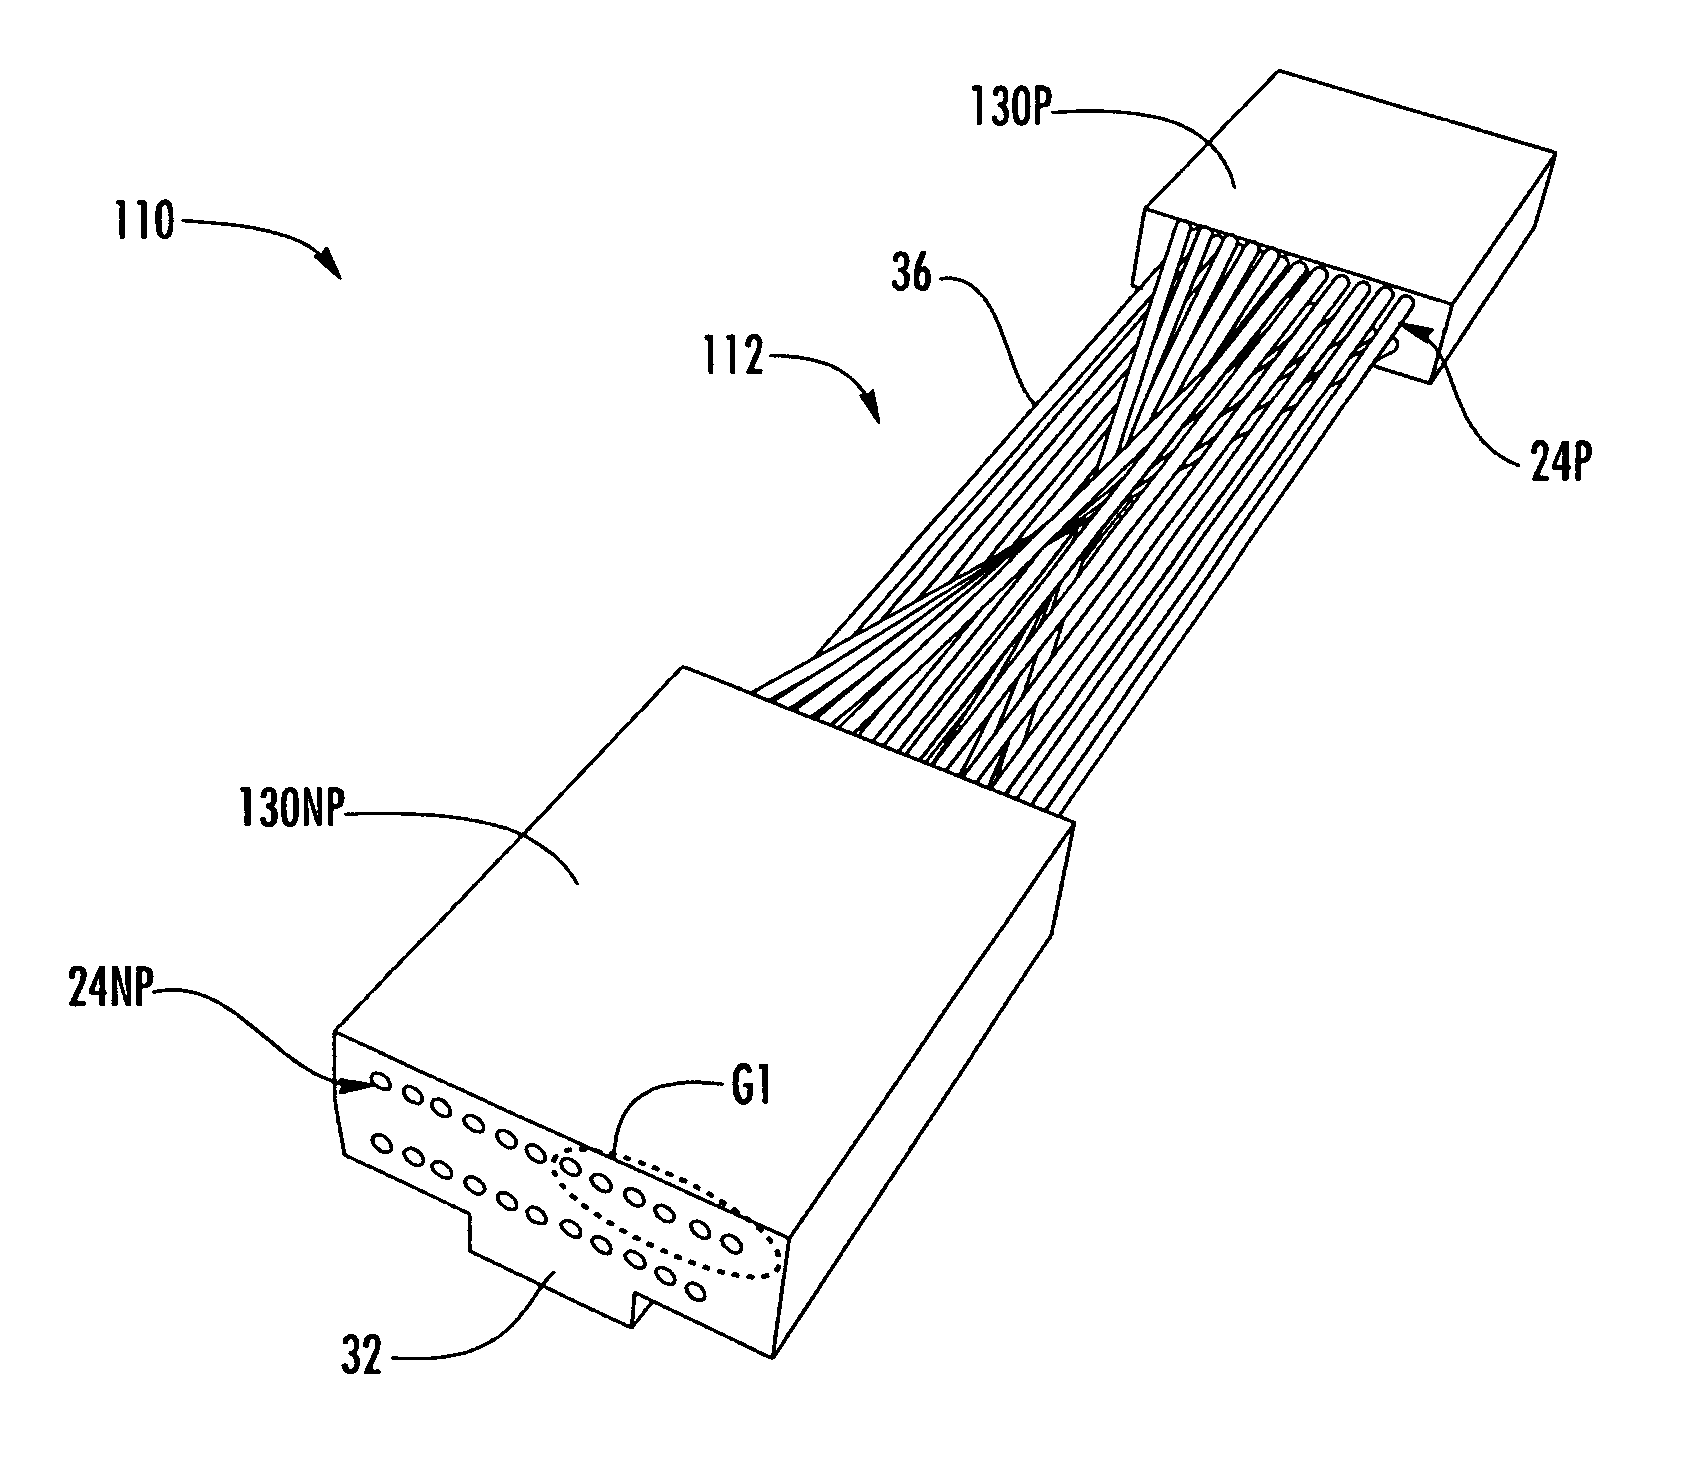 Optical interconnection assemblies and systems for high-speed data-rate optical transport systems